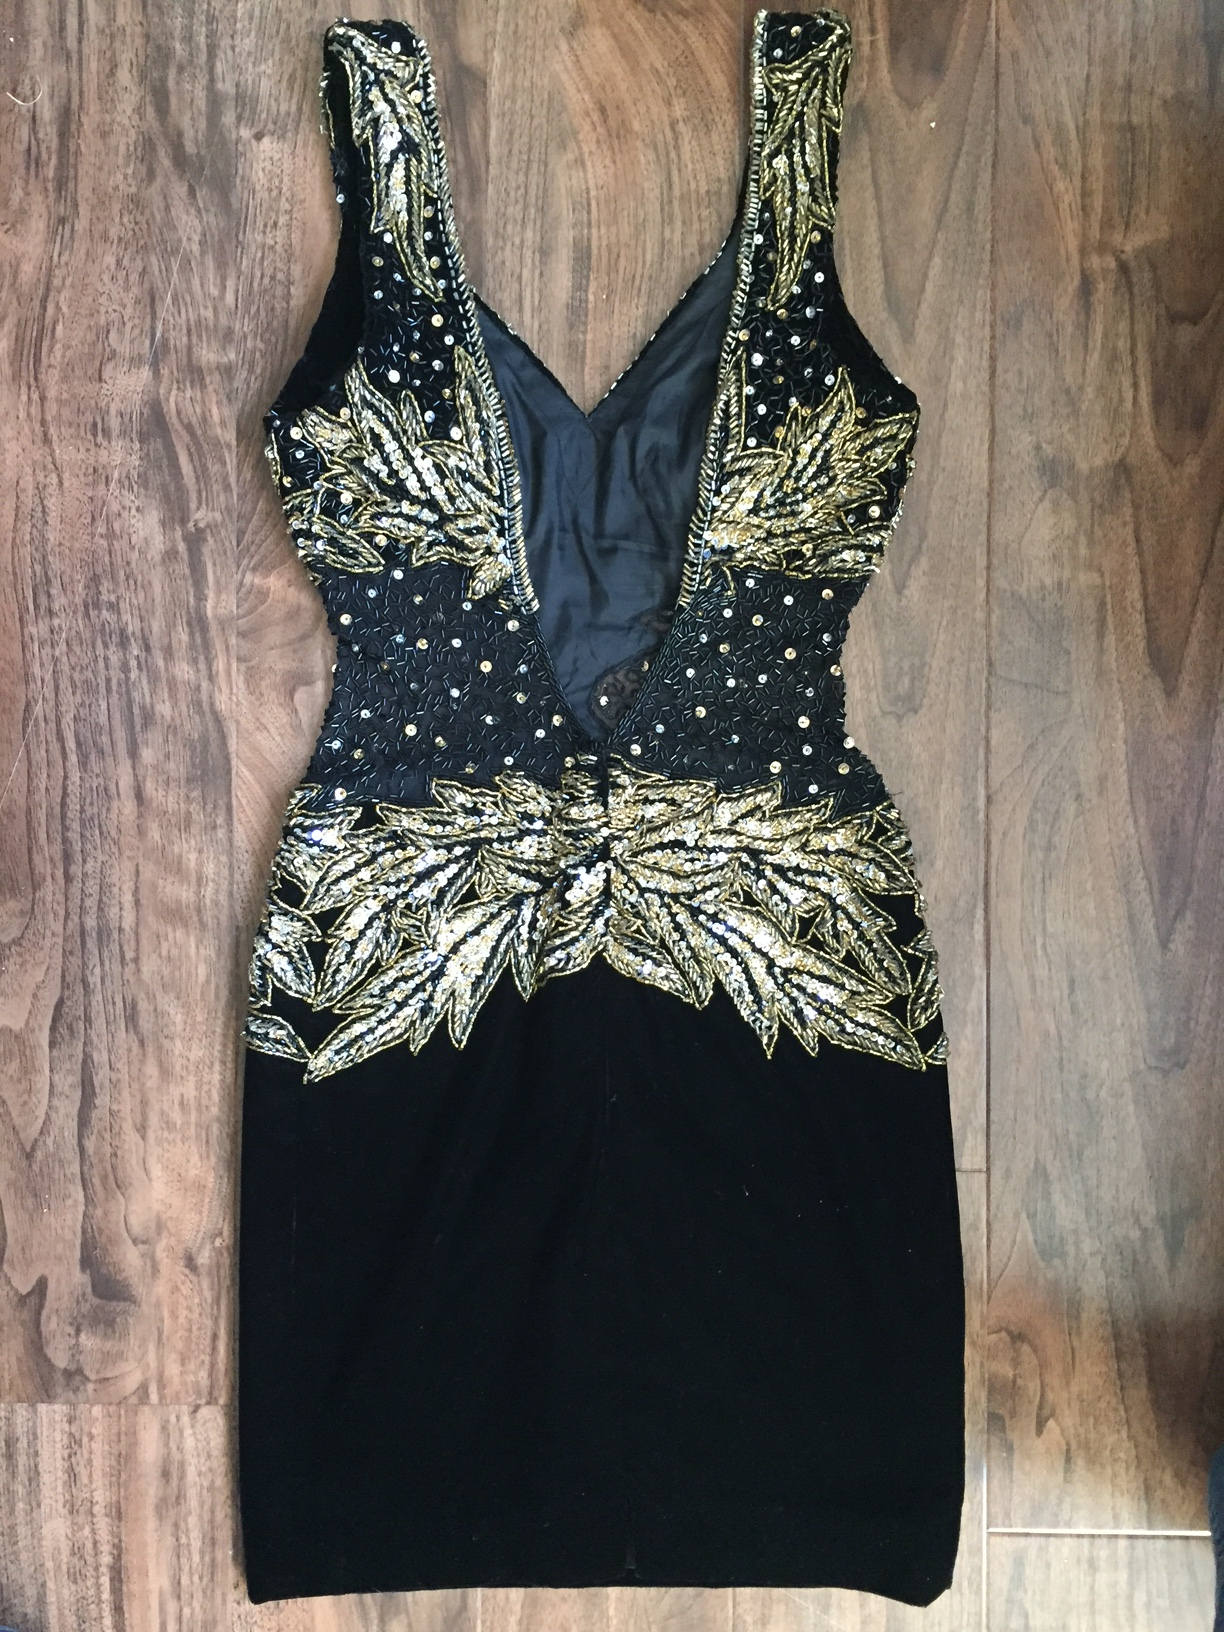 Vintage 80s/90s Black and Gold Bead And Sequin Velvet Cocktail Dress with Illusion Panels - ChicCityVintage